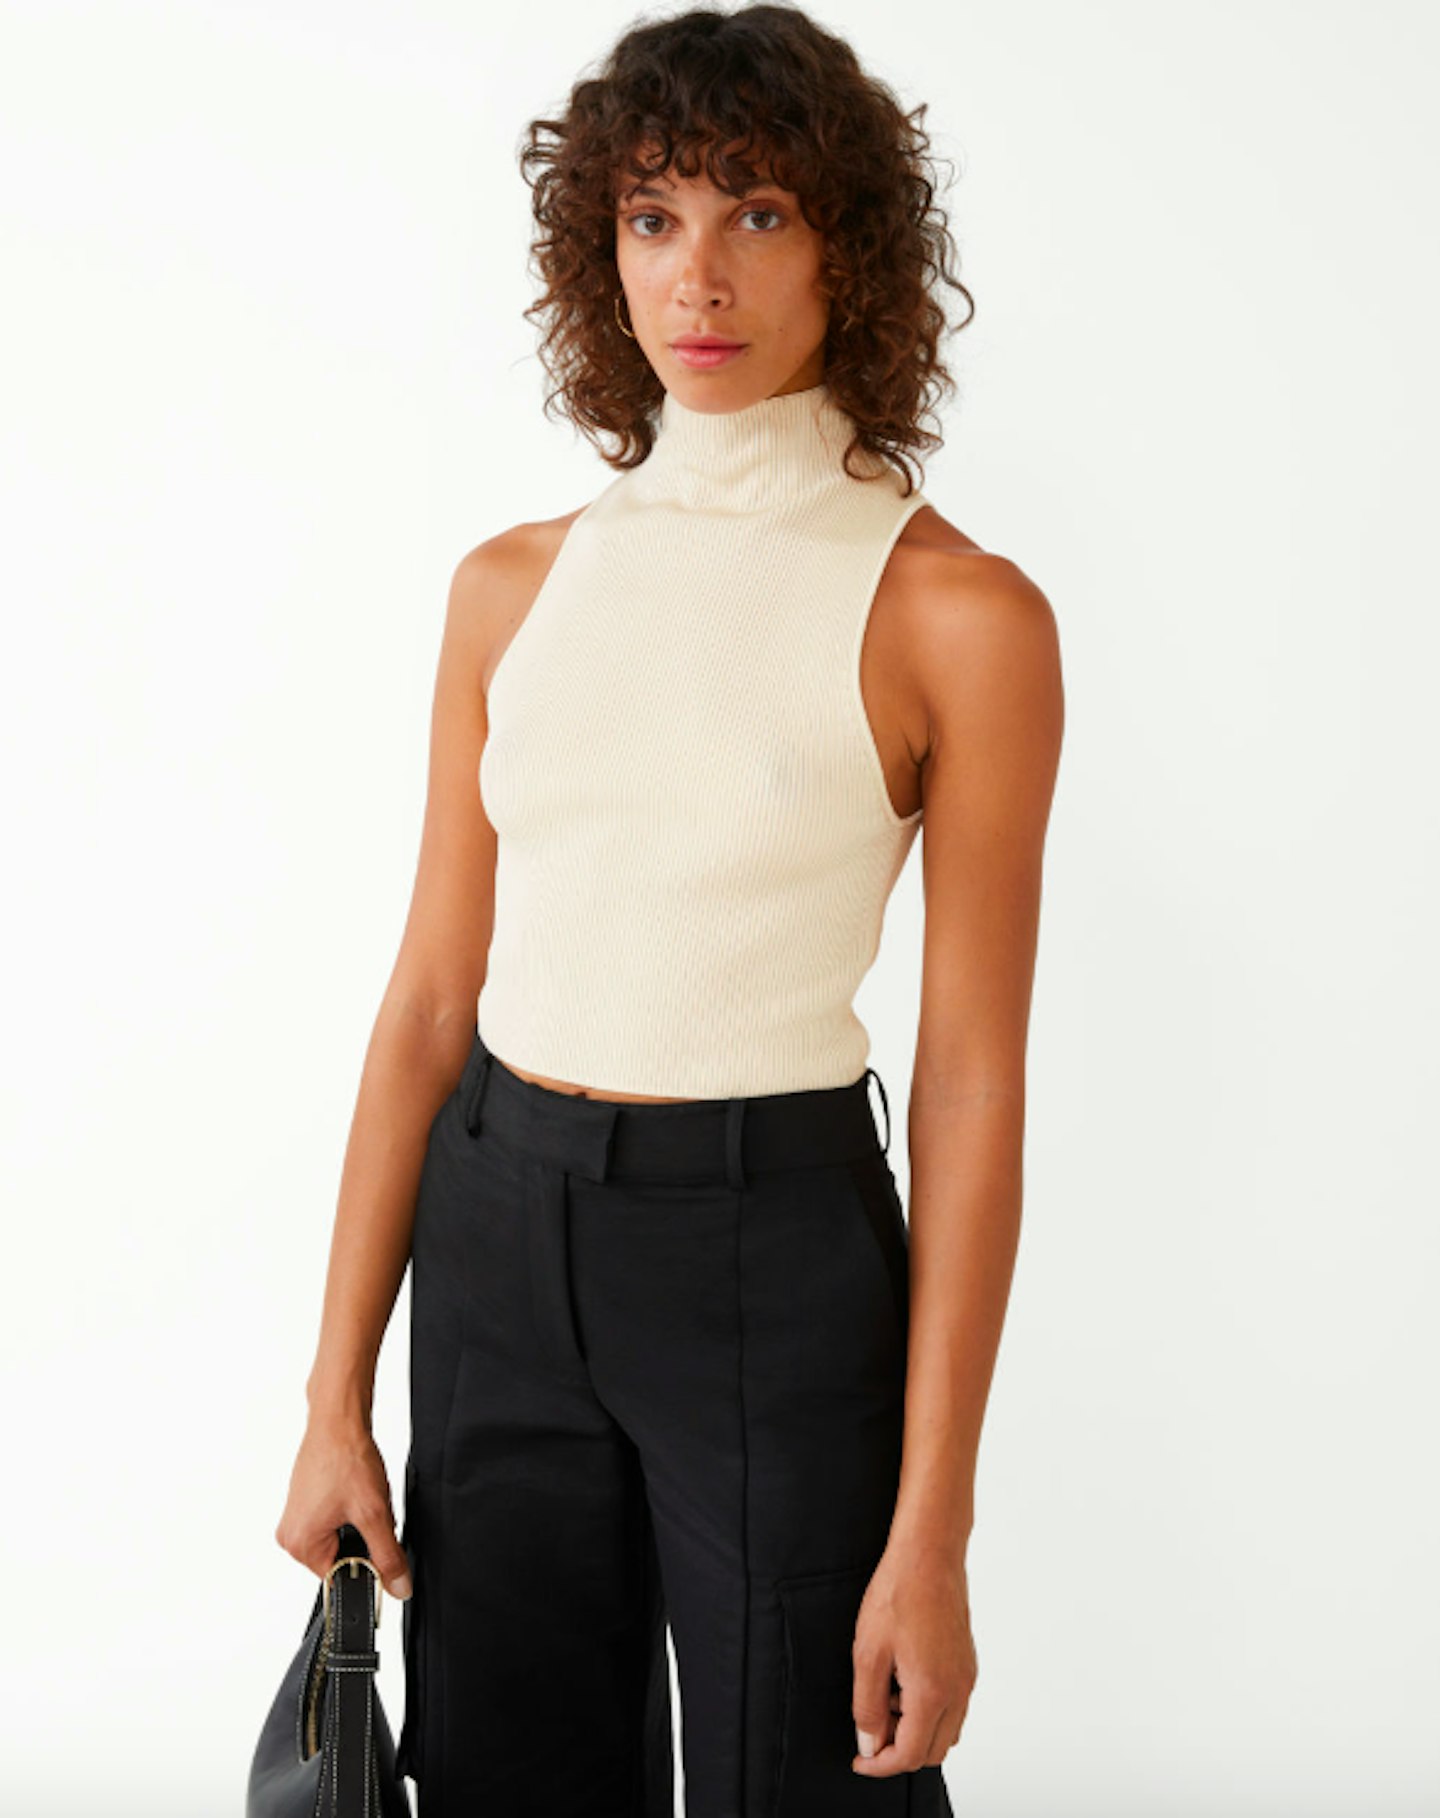 & Other Stories, Sleeveless Knit Crop Top